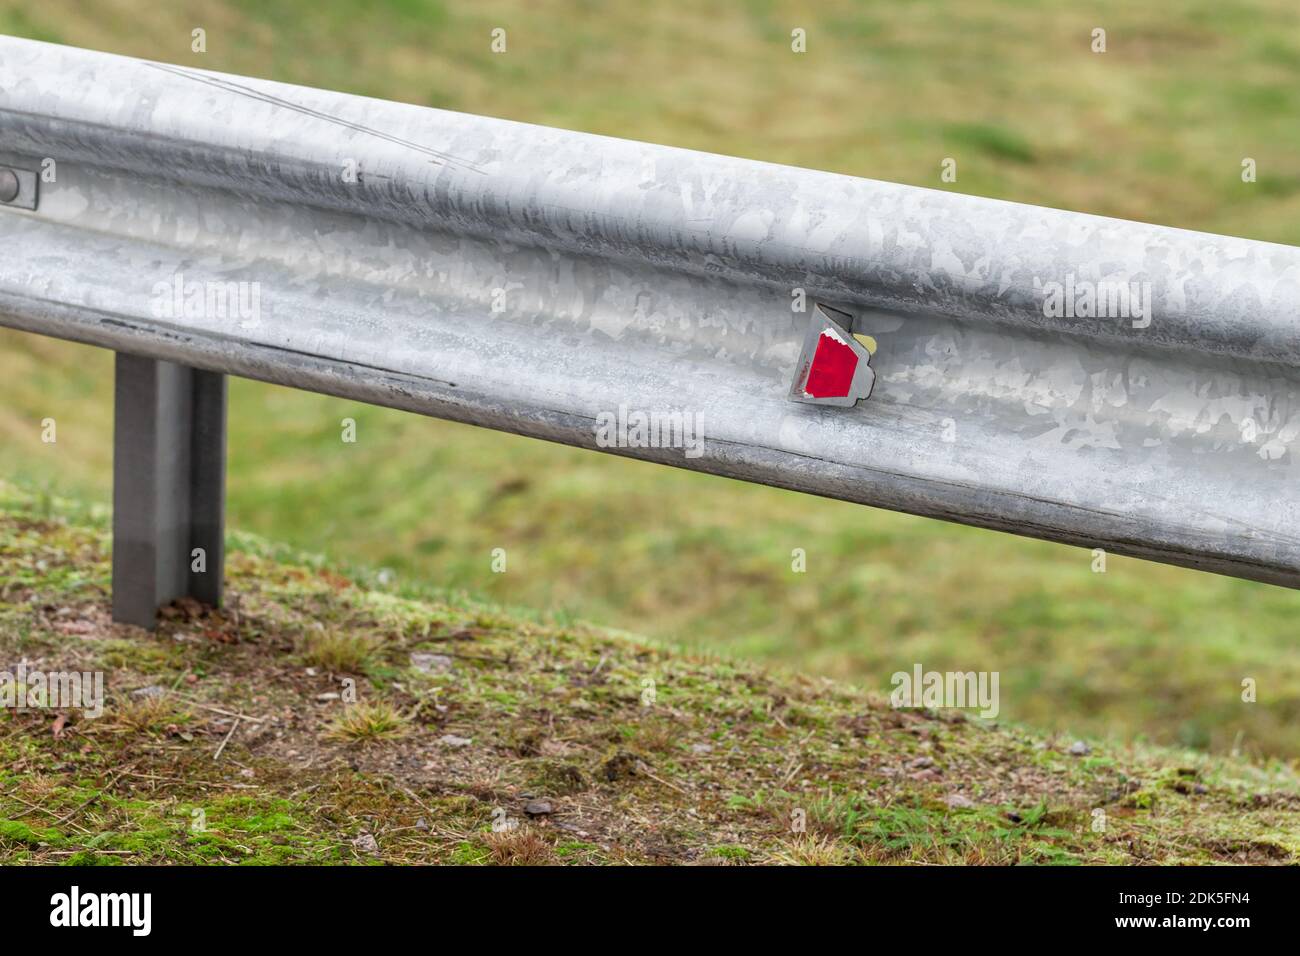 Retroreflector, warning optical unit is on a metal guardrail. Highway safety equipment, close-up Stock Photo